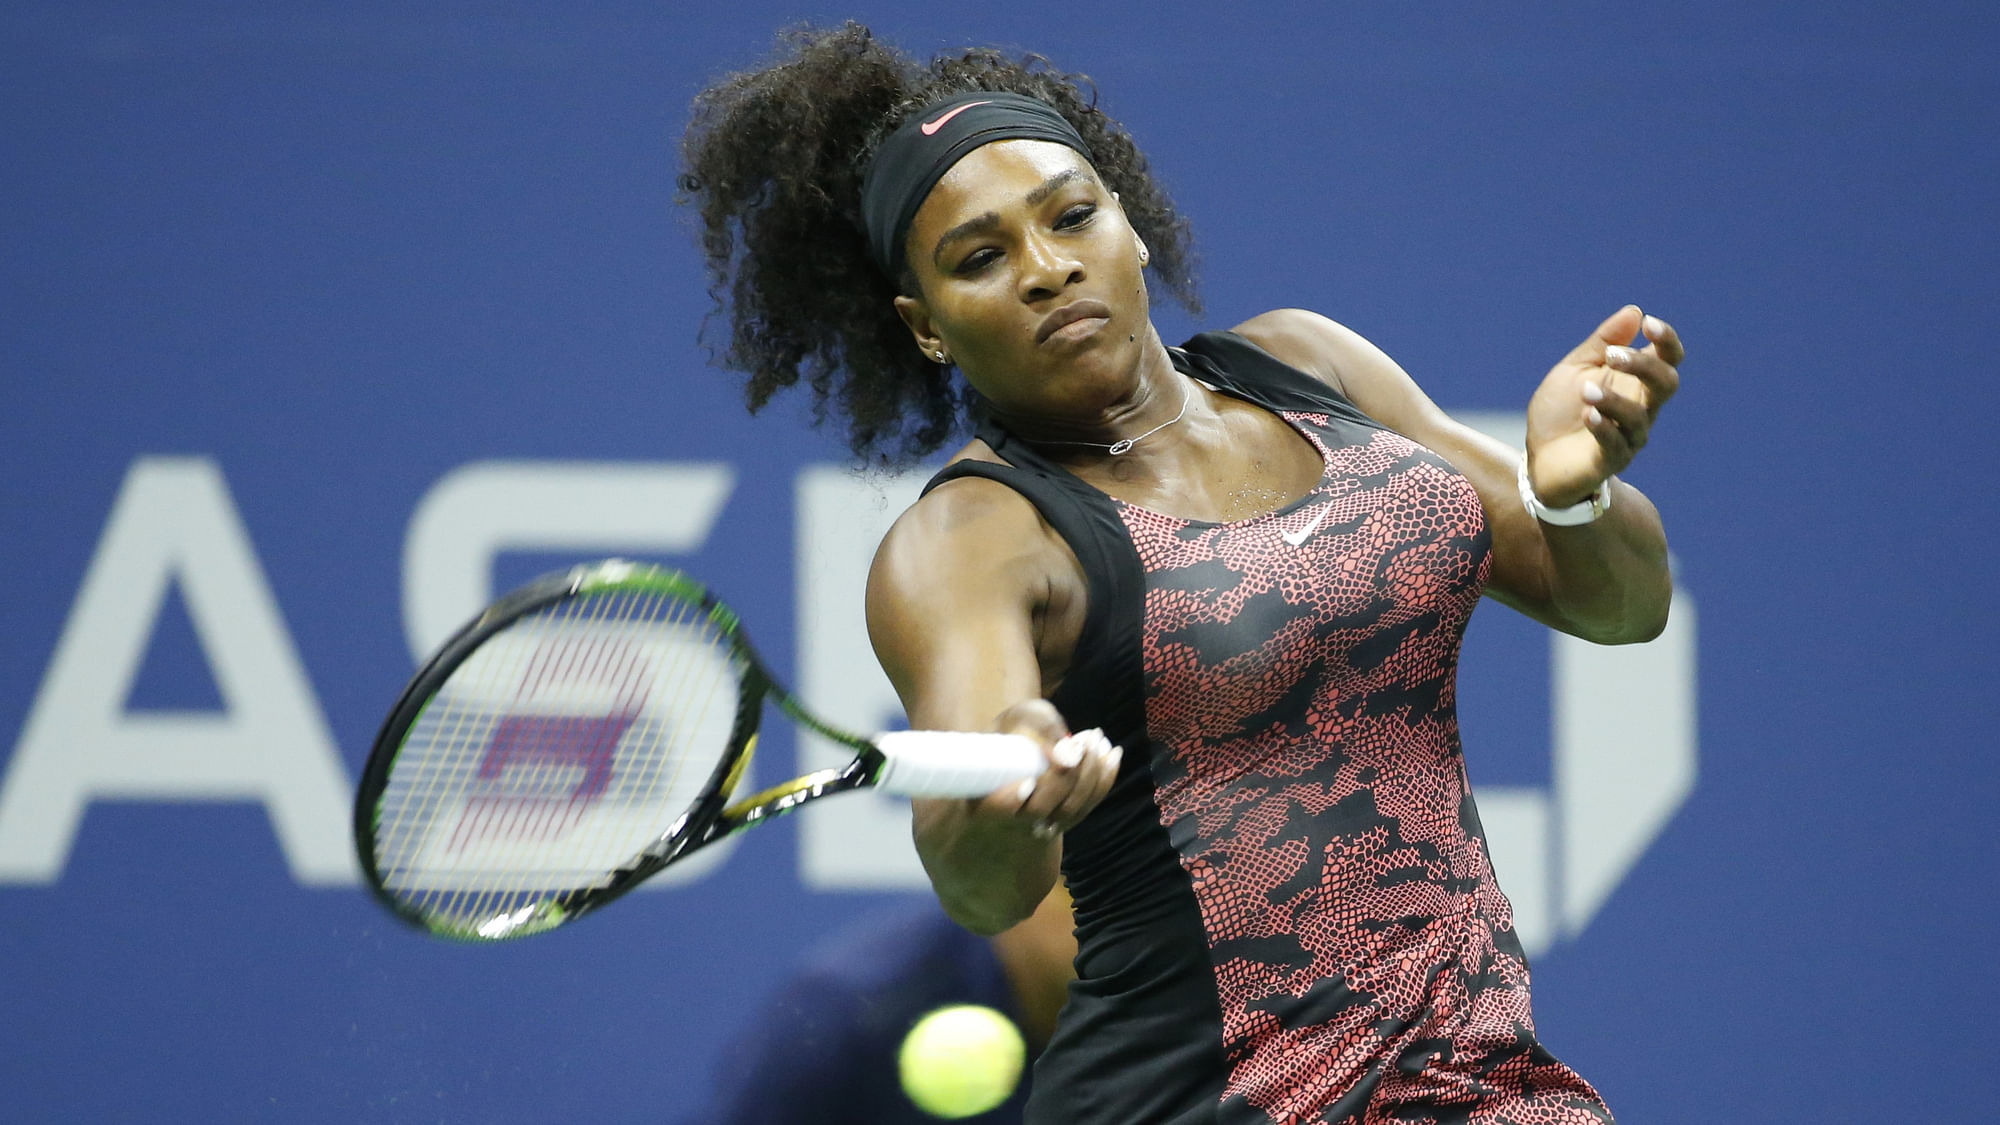 Serena Williams plays a shot in the quarter-final of the US Open. (Photo: AP)